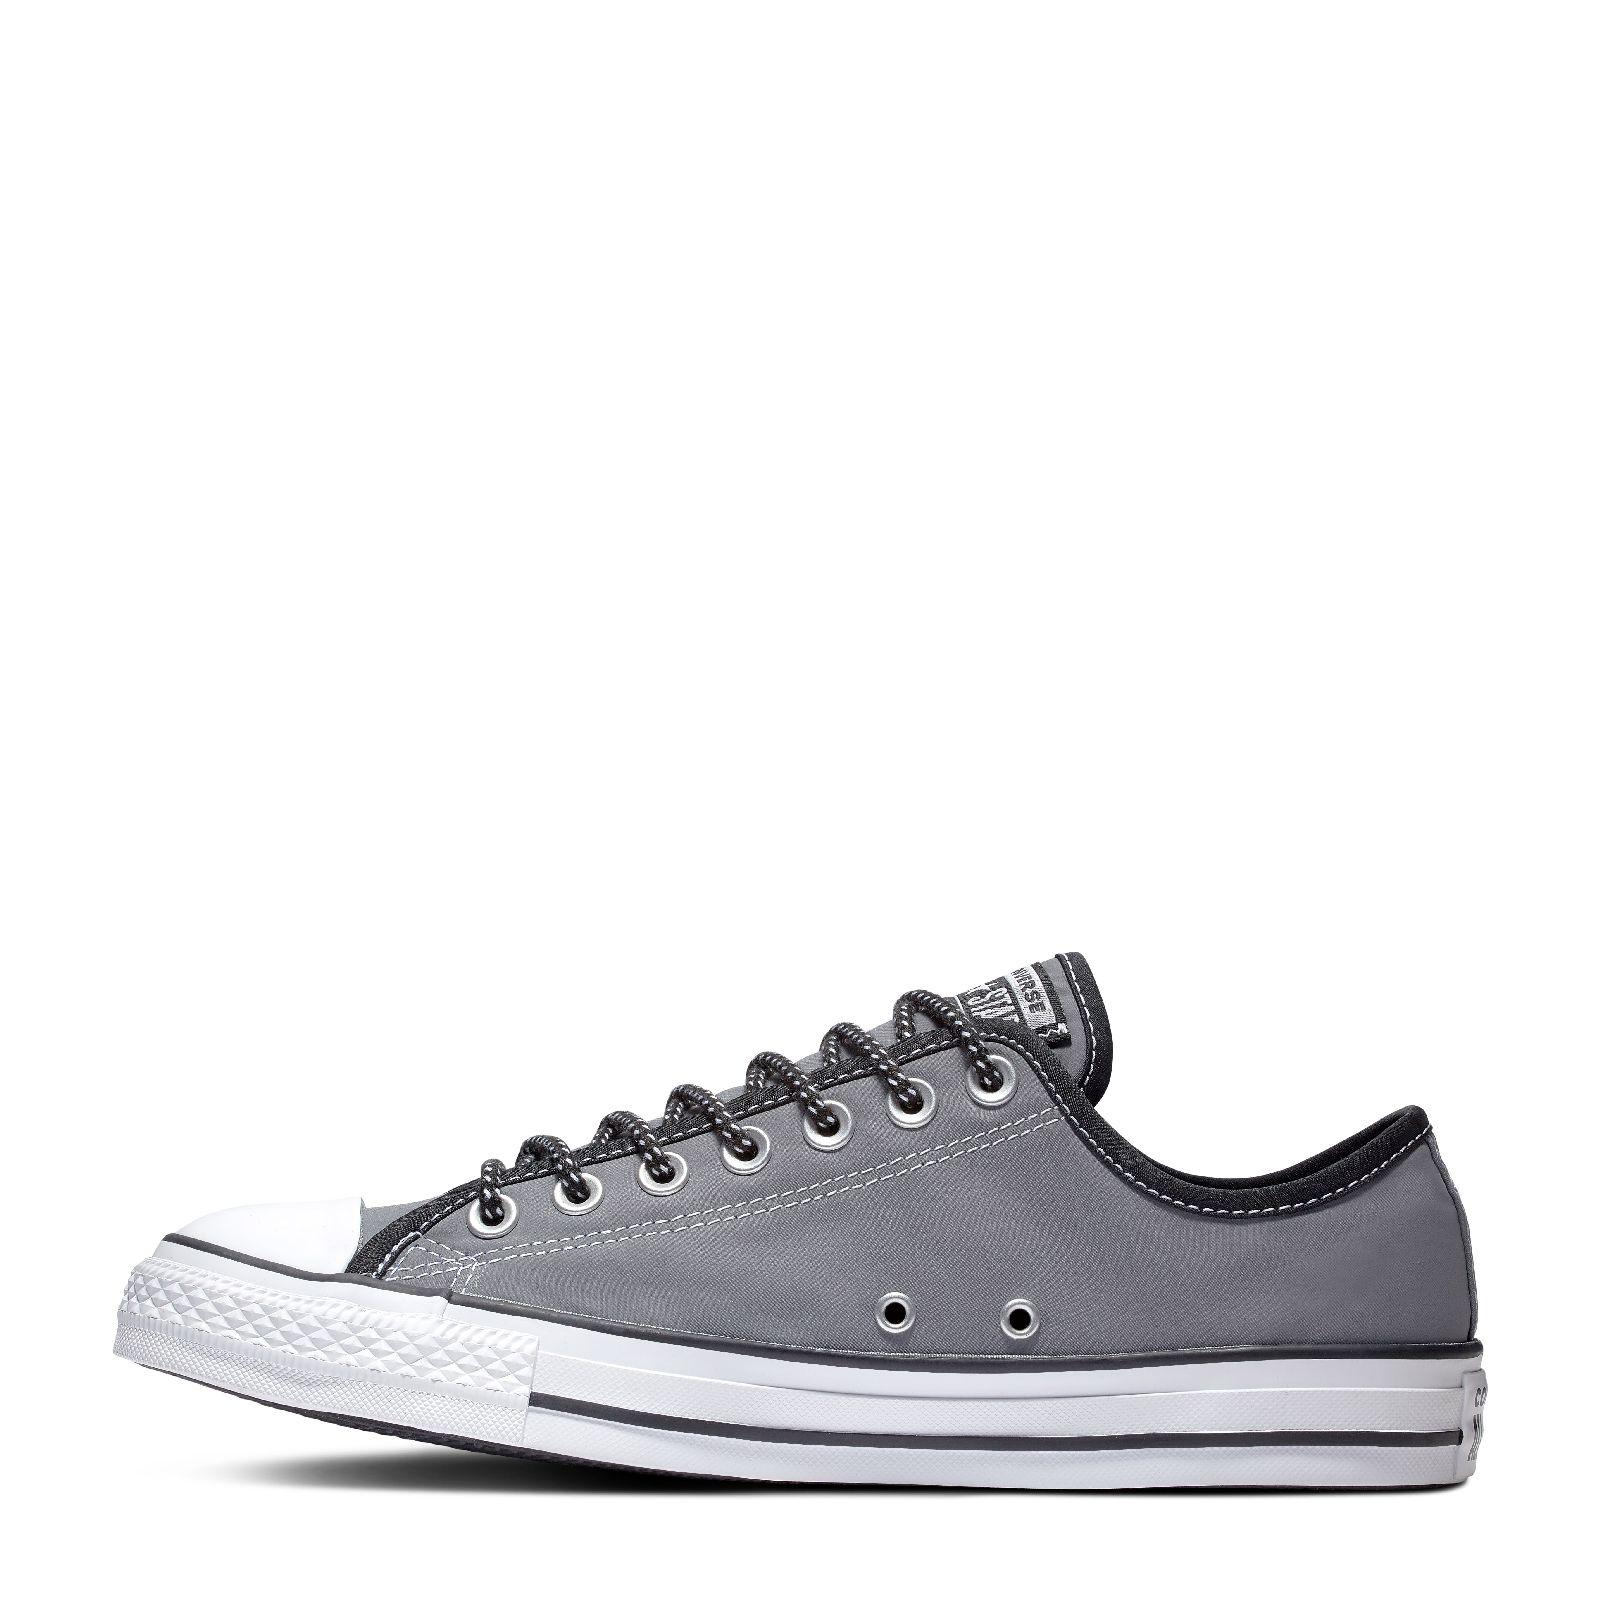 chuck taylor all star get tubed low top